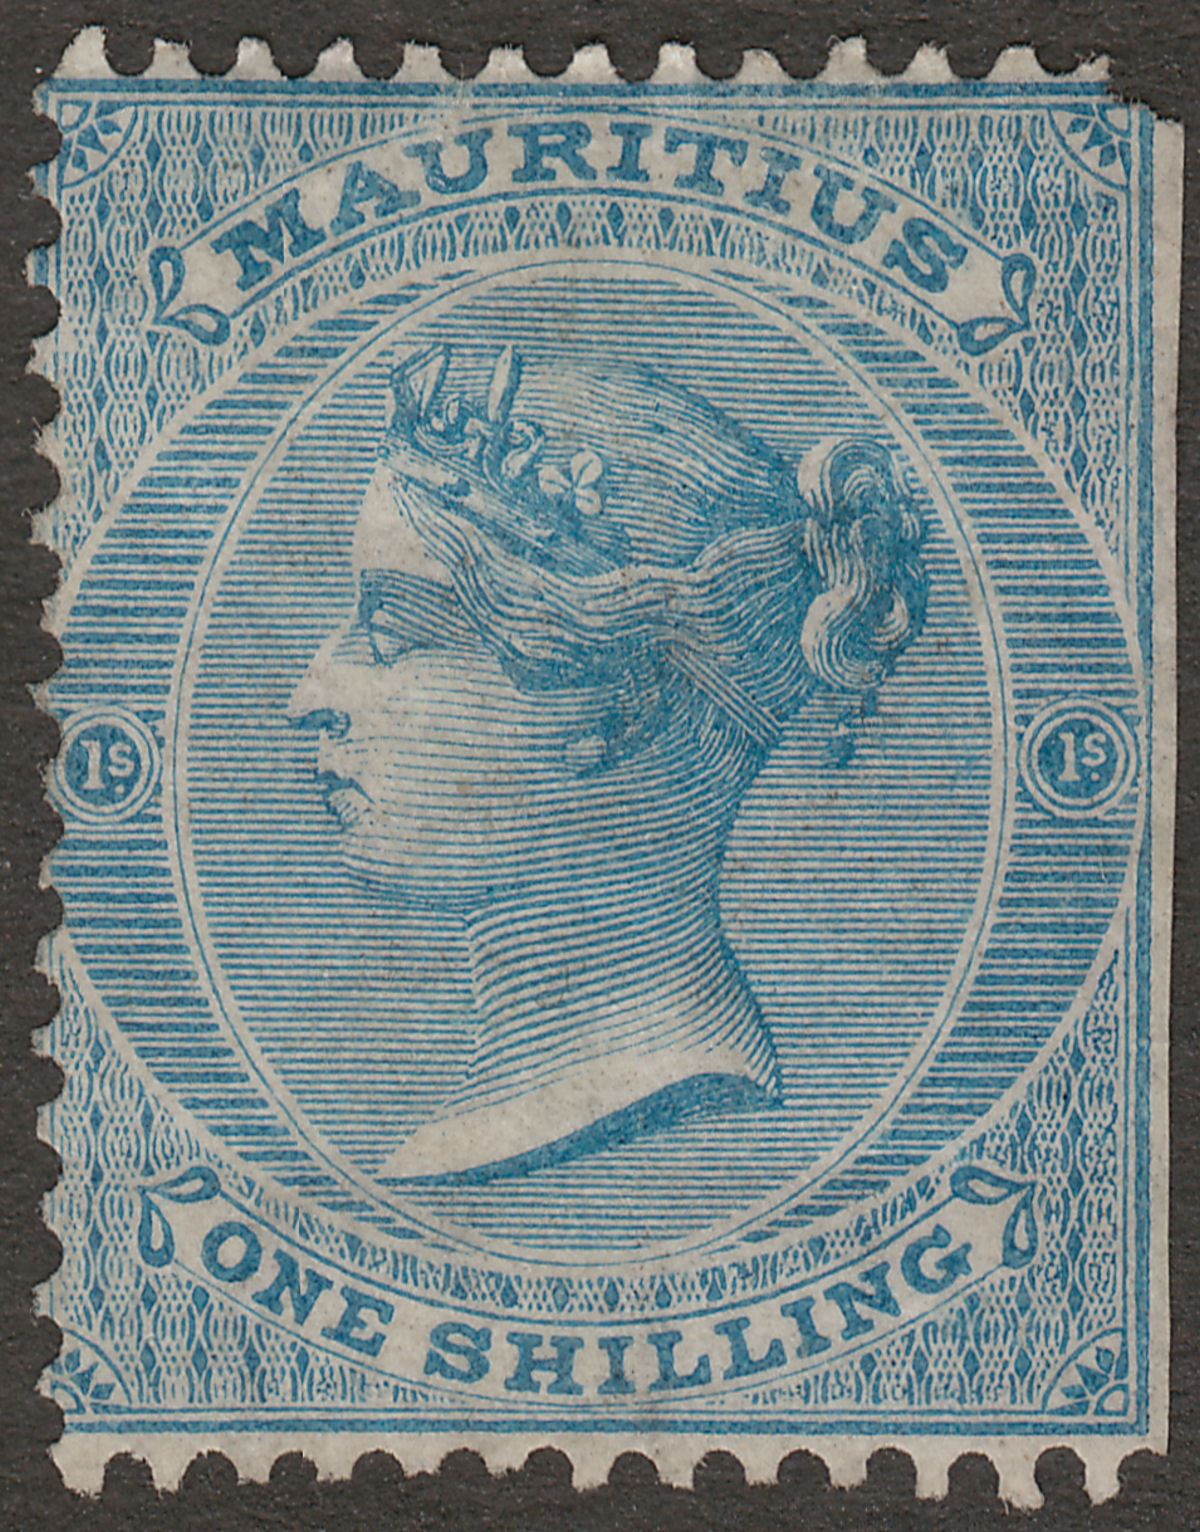 Mauritius 1866 QV 1sh Blue Unused SG69 cat £130 as mint with straight-edge